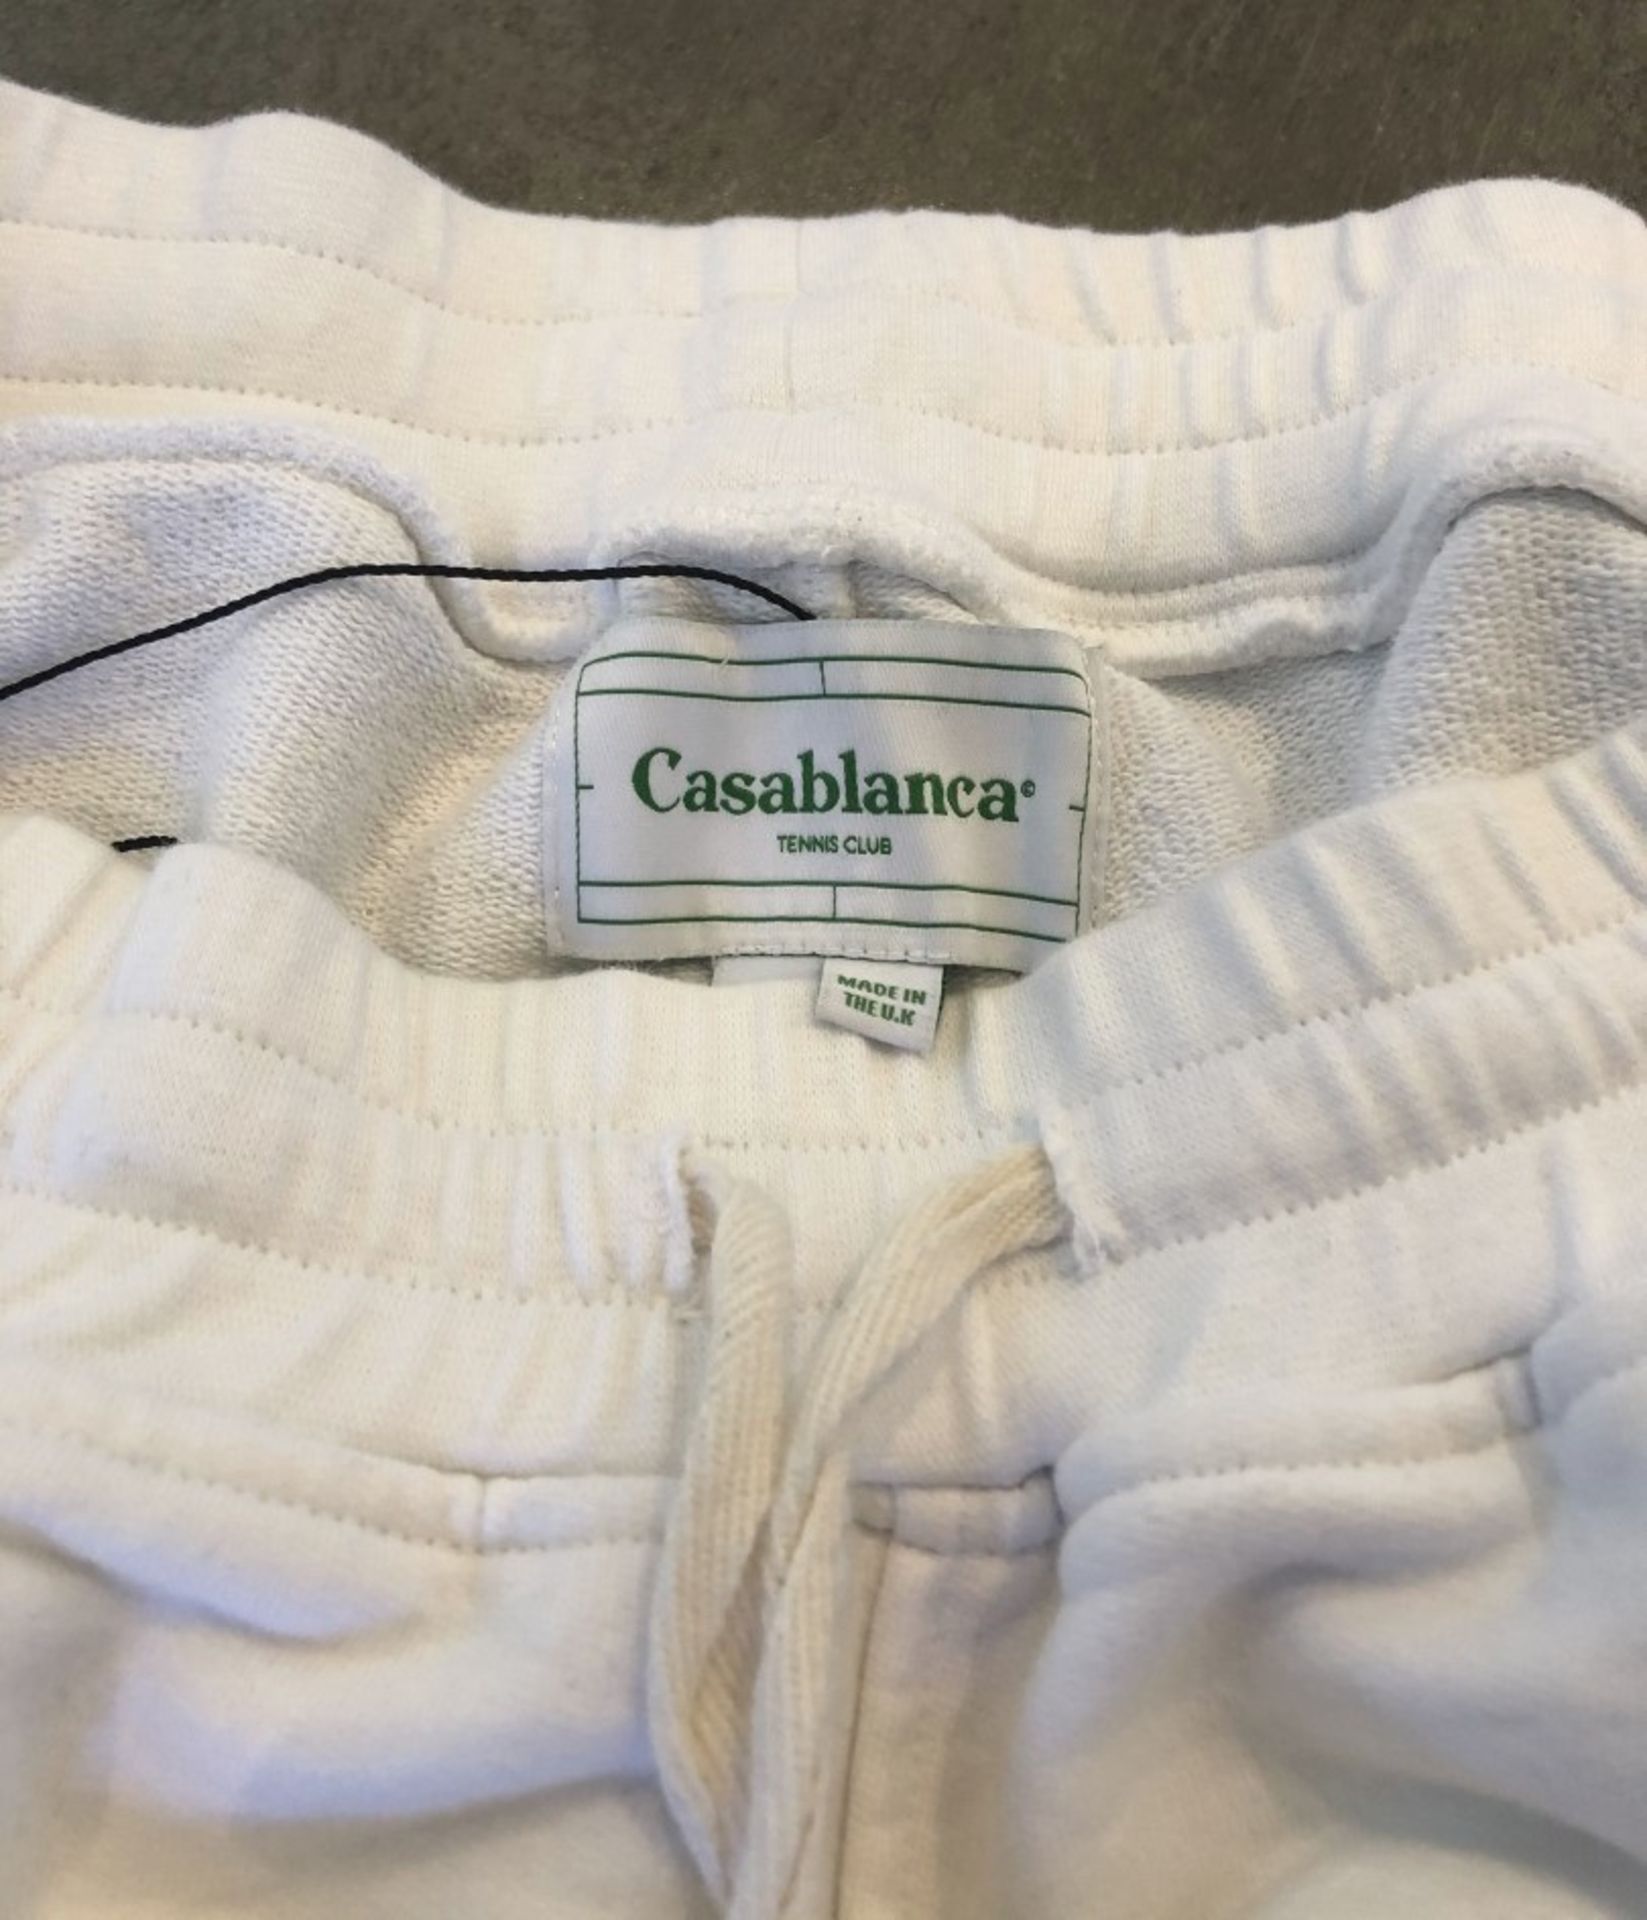 1 x Pair Of Men's Genuine Casablanca Tracksuit Bottoms In White - Size (EU/UK): L/L - Preowned - - Image 3 of 6